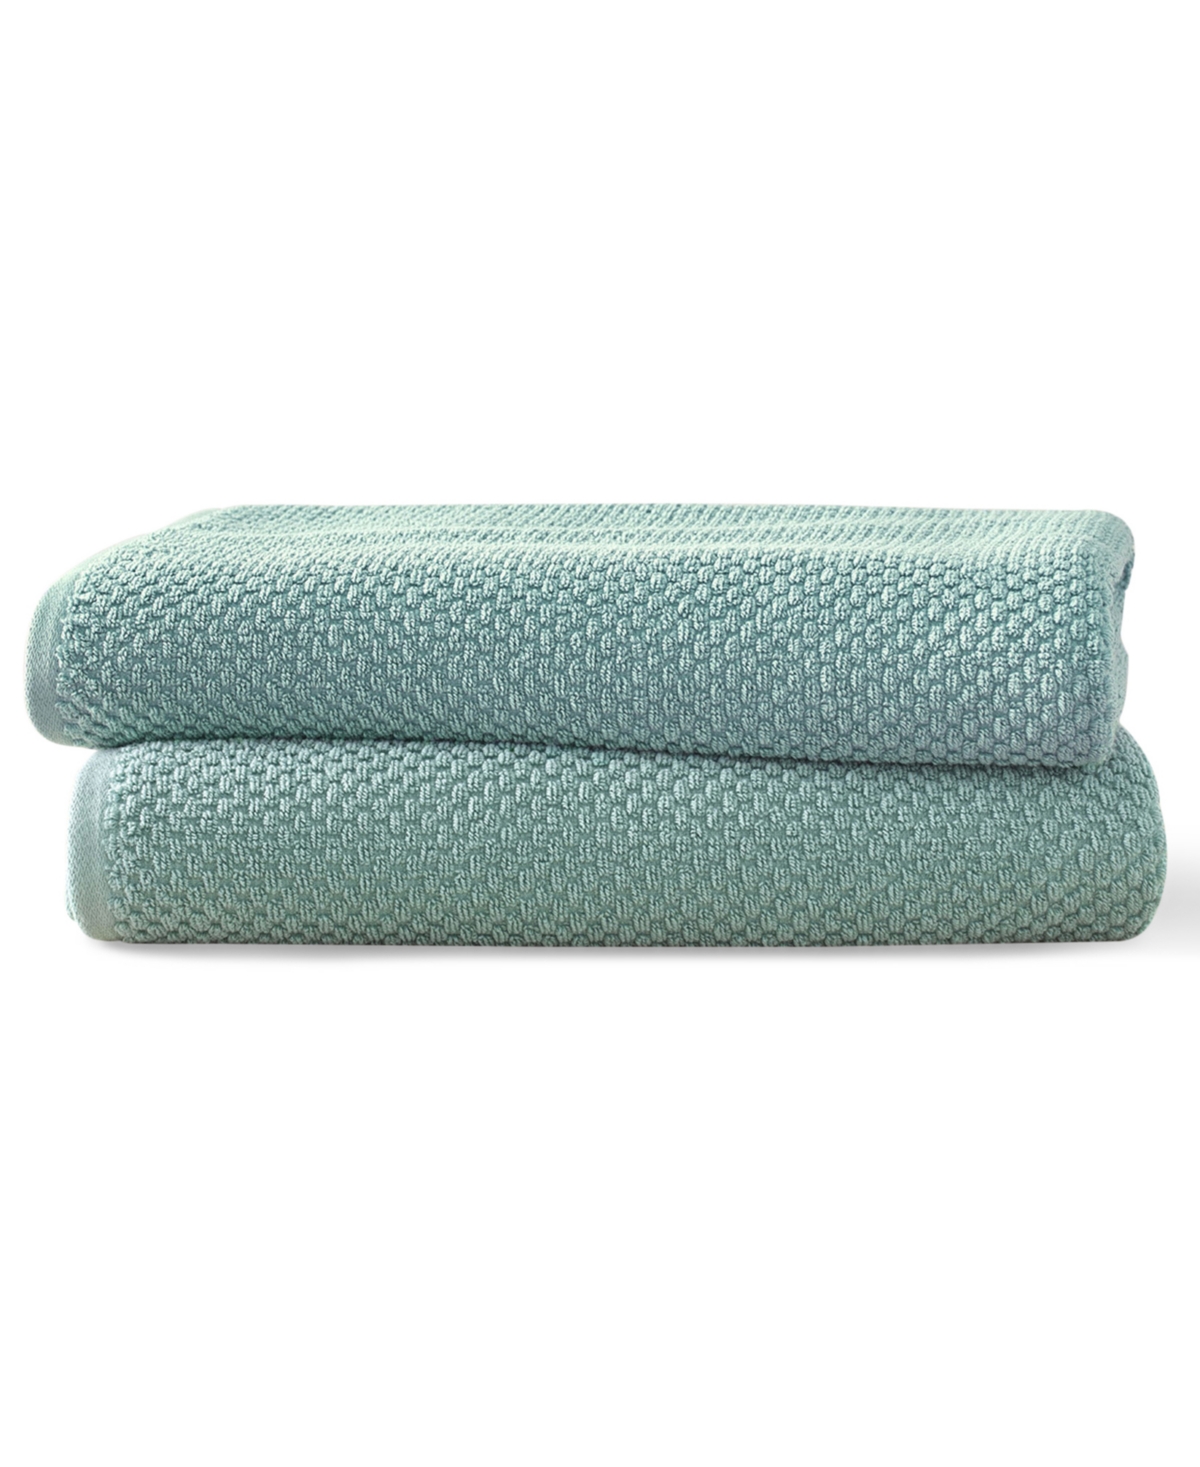 Blue Loom Lilly Cotton And Rayon From Bamboo 2 Piece Bath Towel Set, 56" X 30" In Seafoam